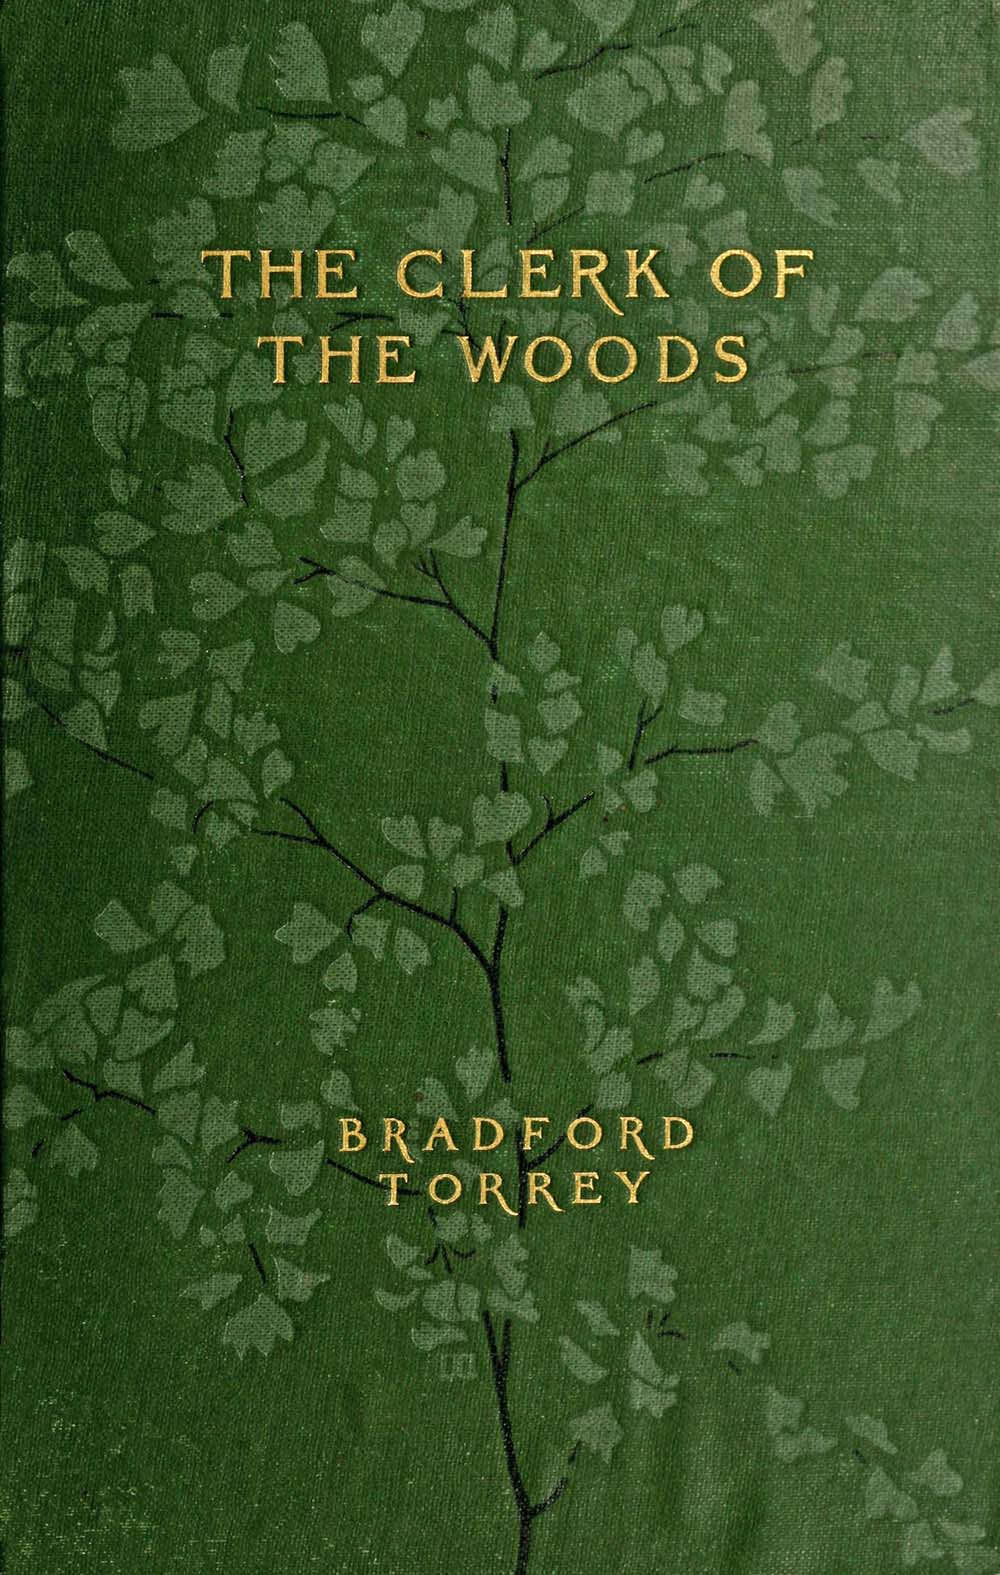 The Project Gutenberg eBook of The Clerk of the Woods, by Bradford Torrey photo photo pic